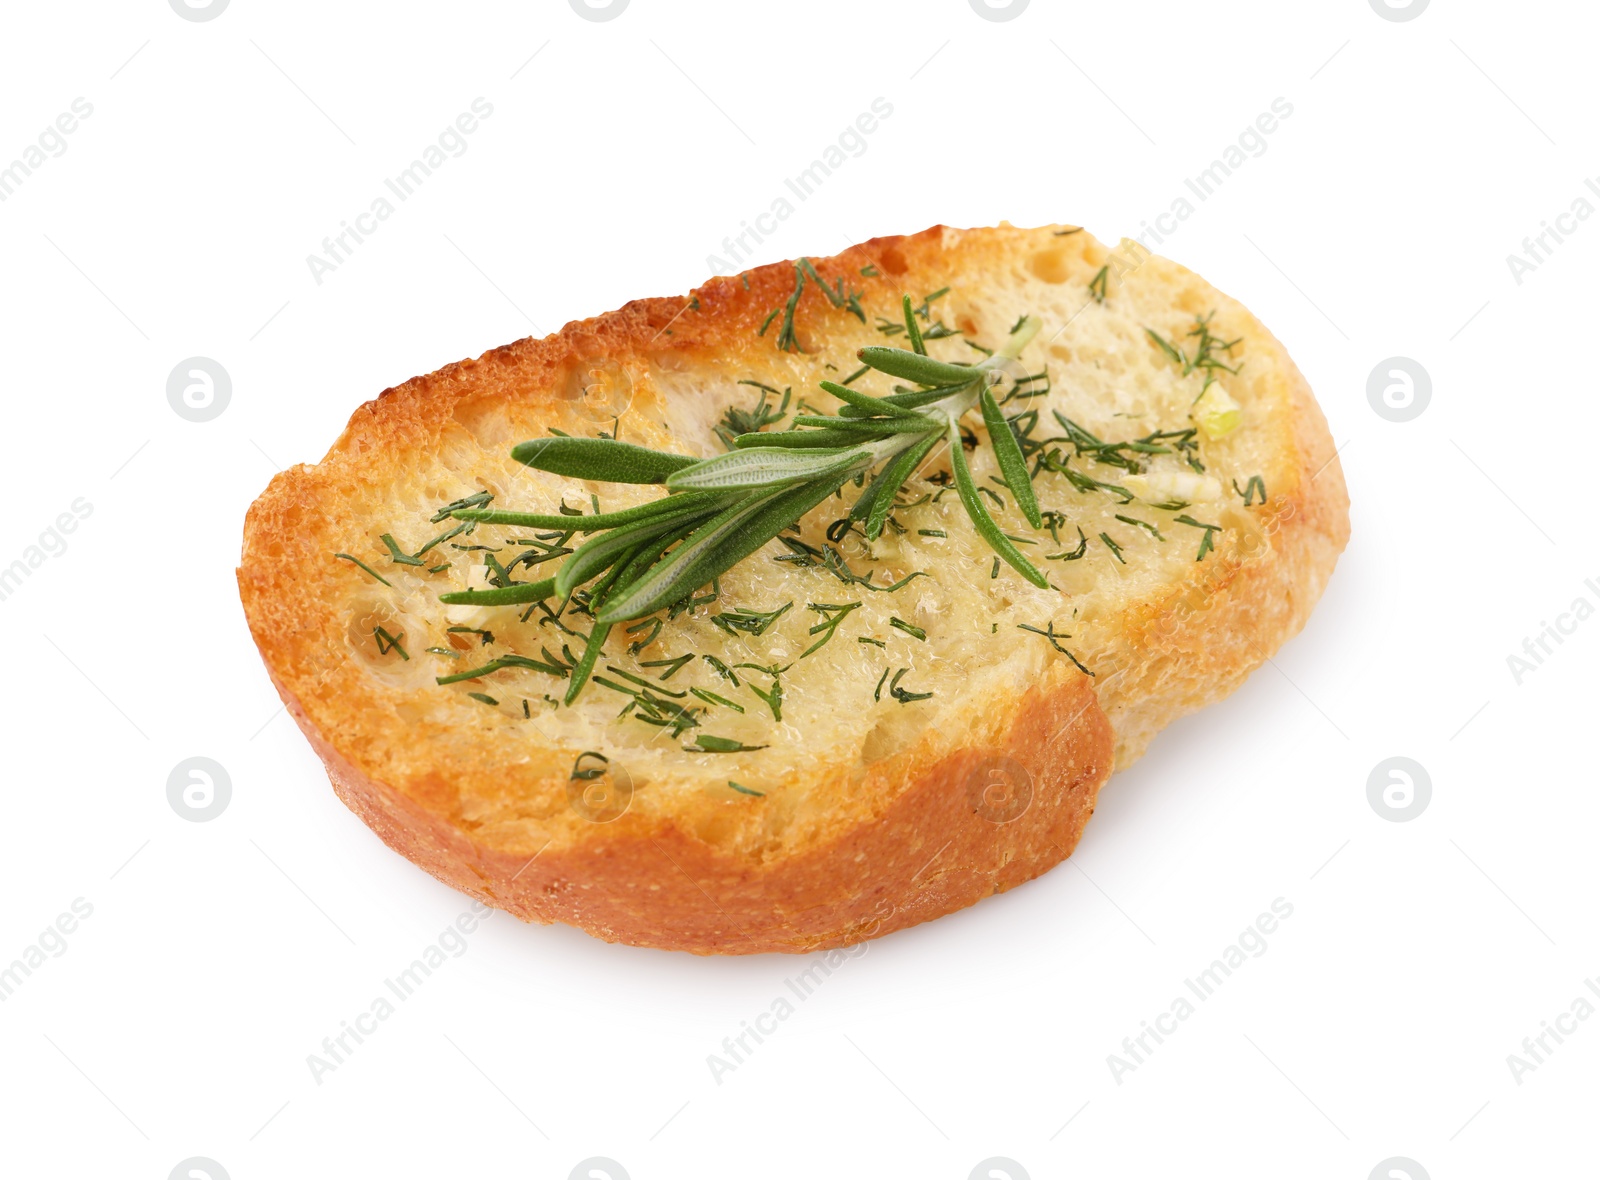 Photo of Piece of tasty baguette with rosemary and dill isolated on white